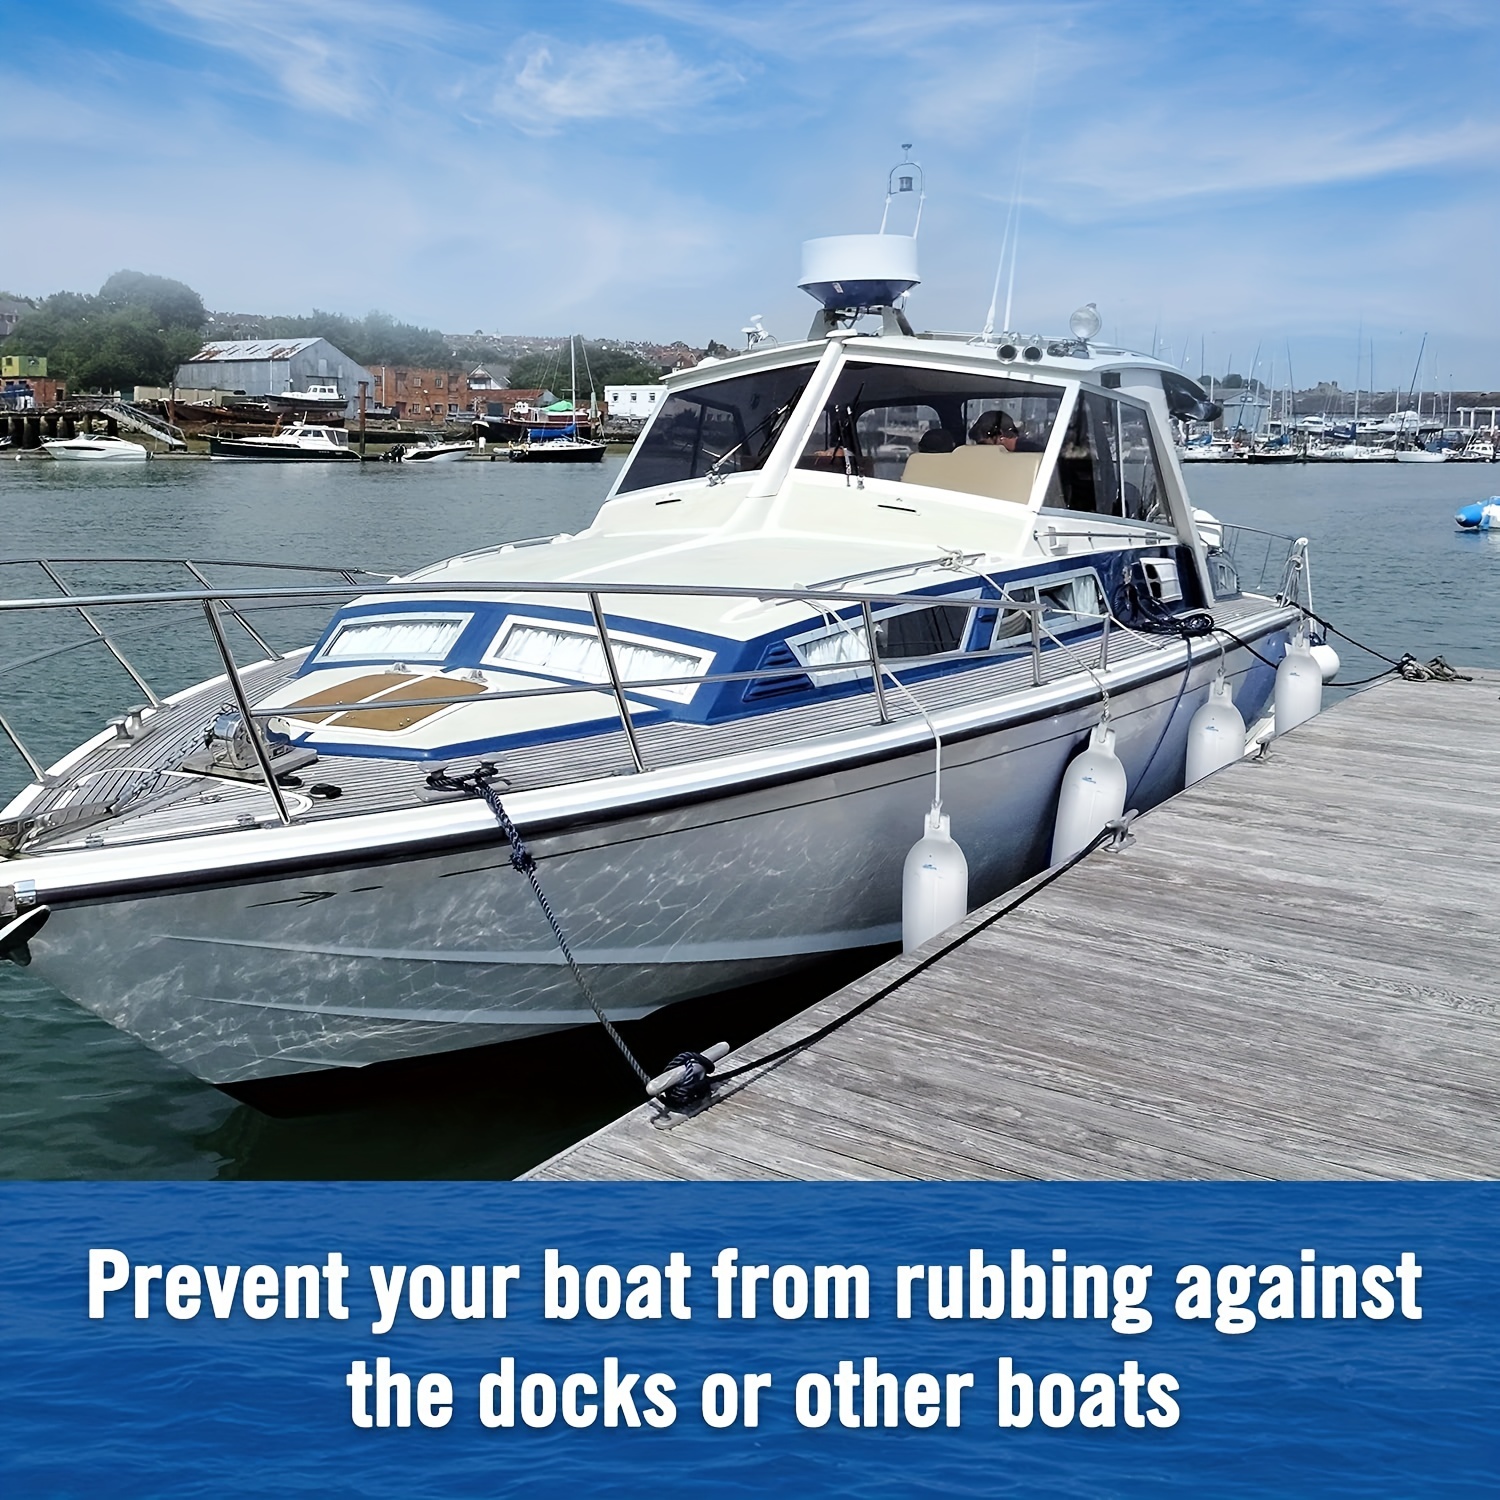 Heavy Duty Marine Fender Protect Your Boat From Damage With This Durable  Bumper, Shop Now For Limited-time Deals